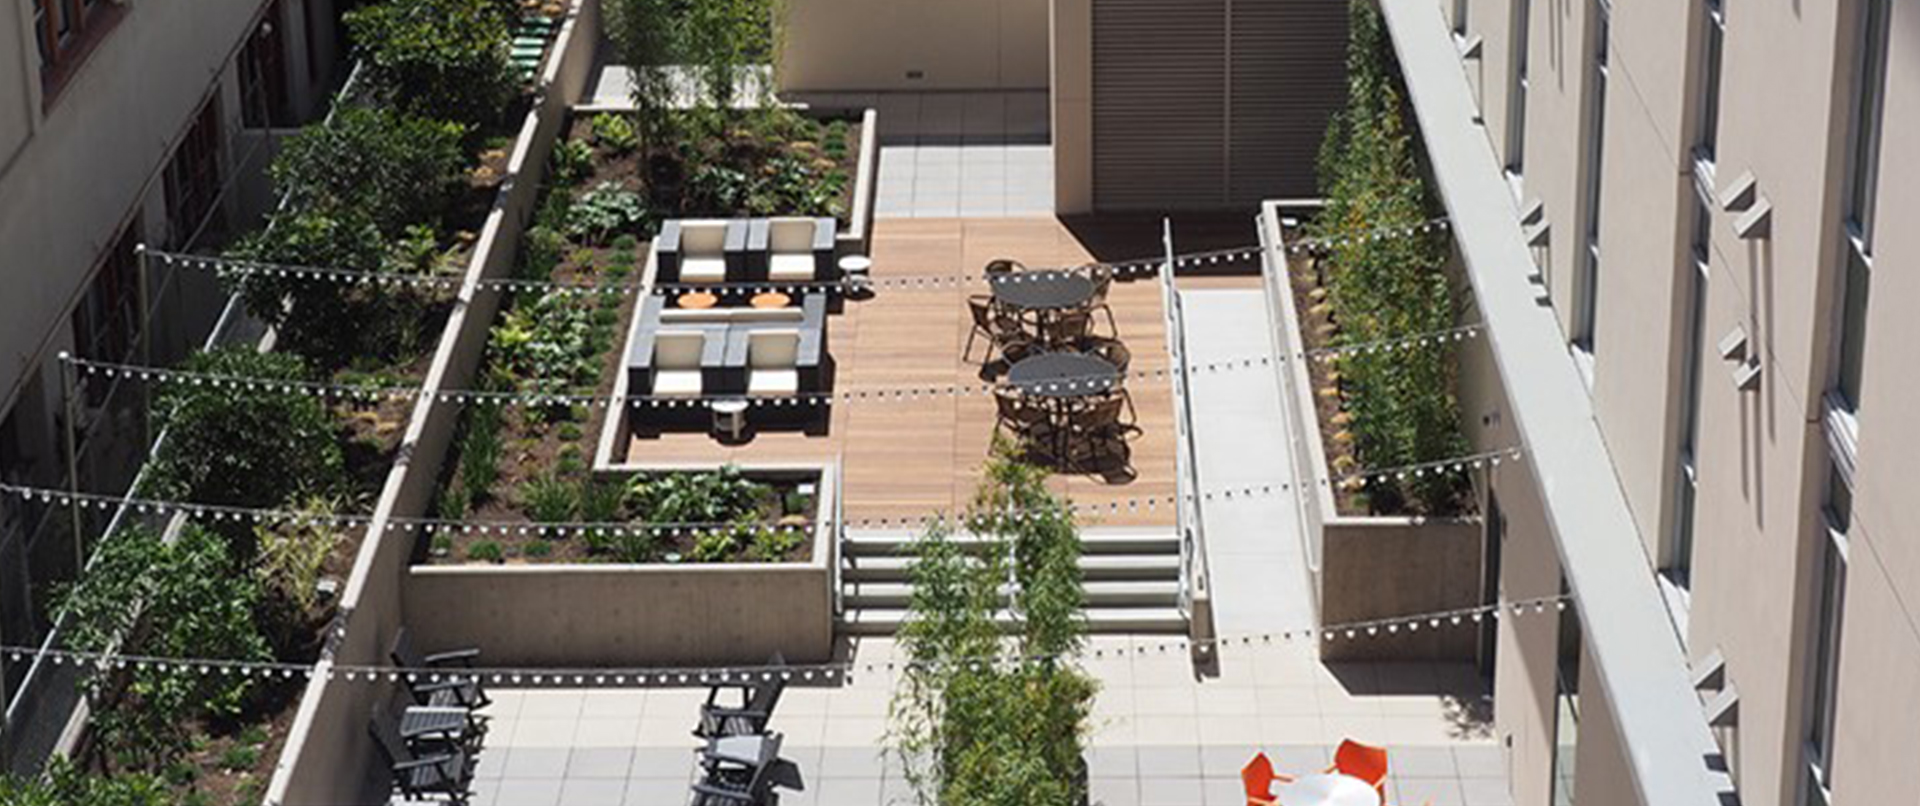 Aerial View Rooftop with Greenery 